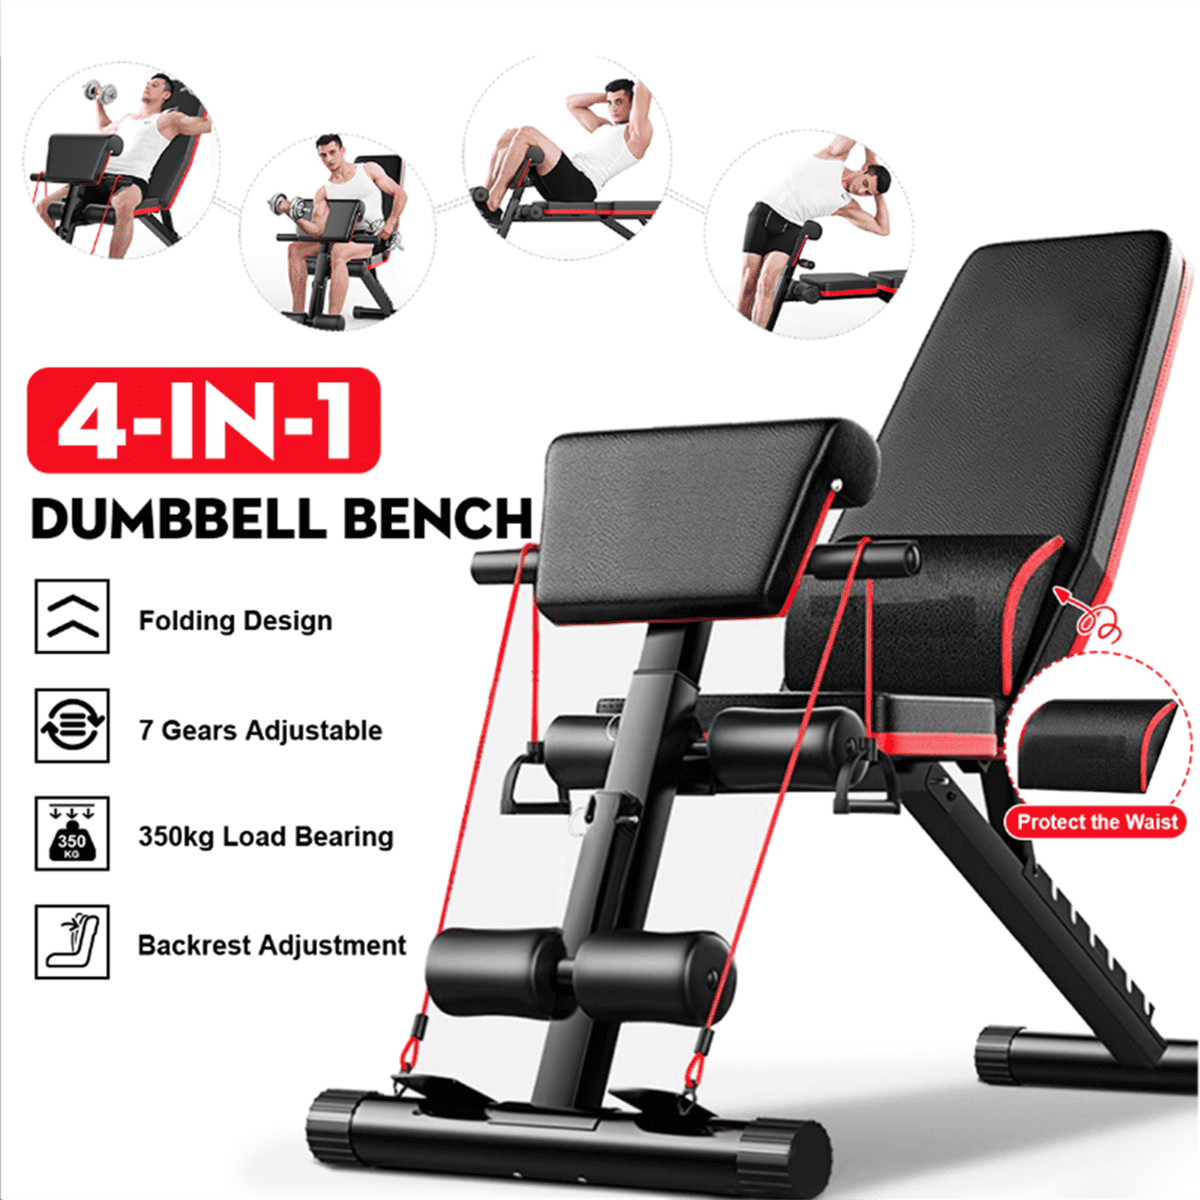 6-in-1 Adjustable Weight Bench Foldable Multipurpose Workout Bench for Home Gym 